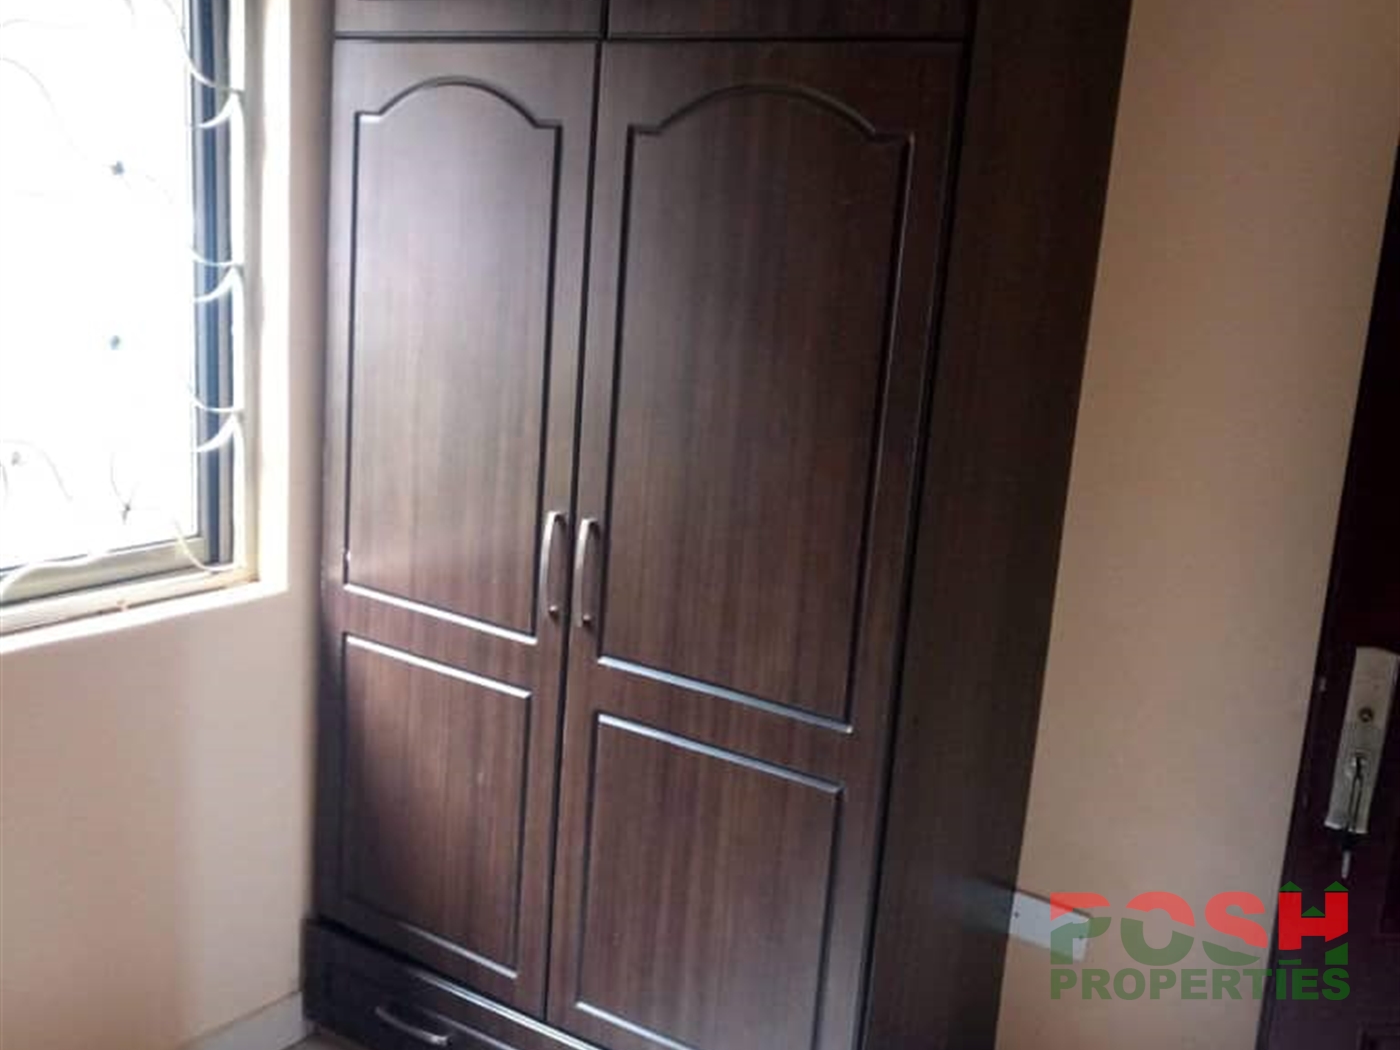 Town House for rent in Kyanja Wakiso